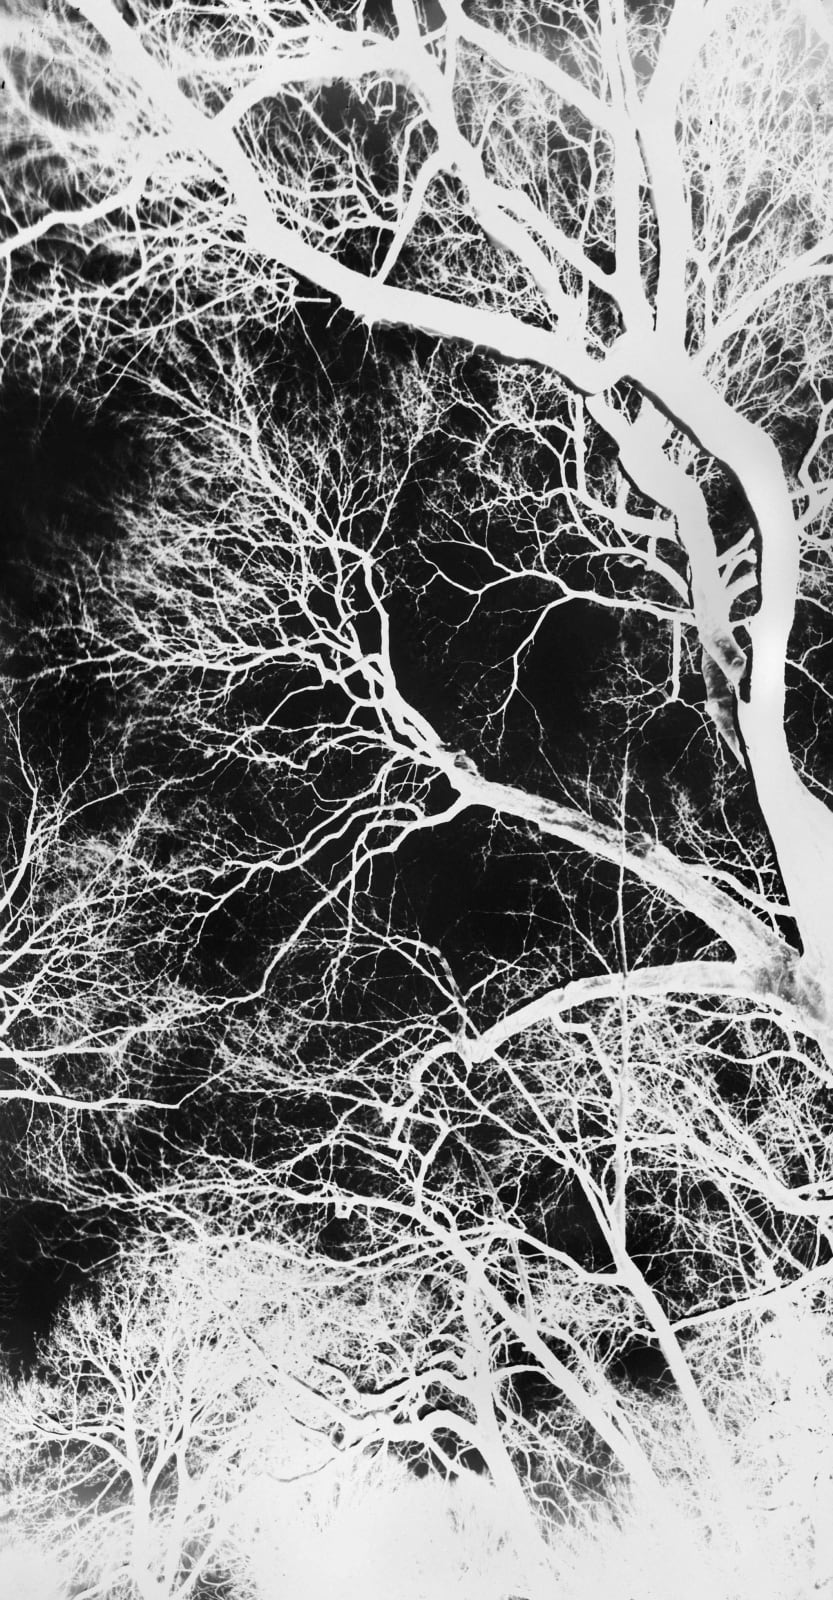 Central Park, New York tree branches from a camera obscura by Vera Lutter